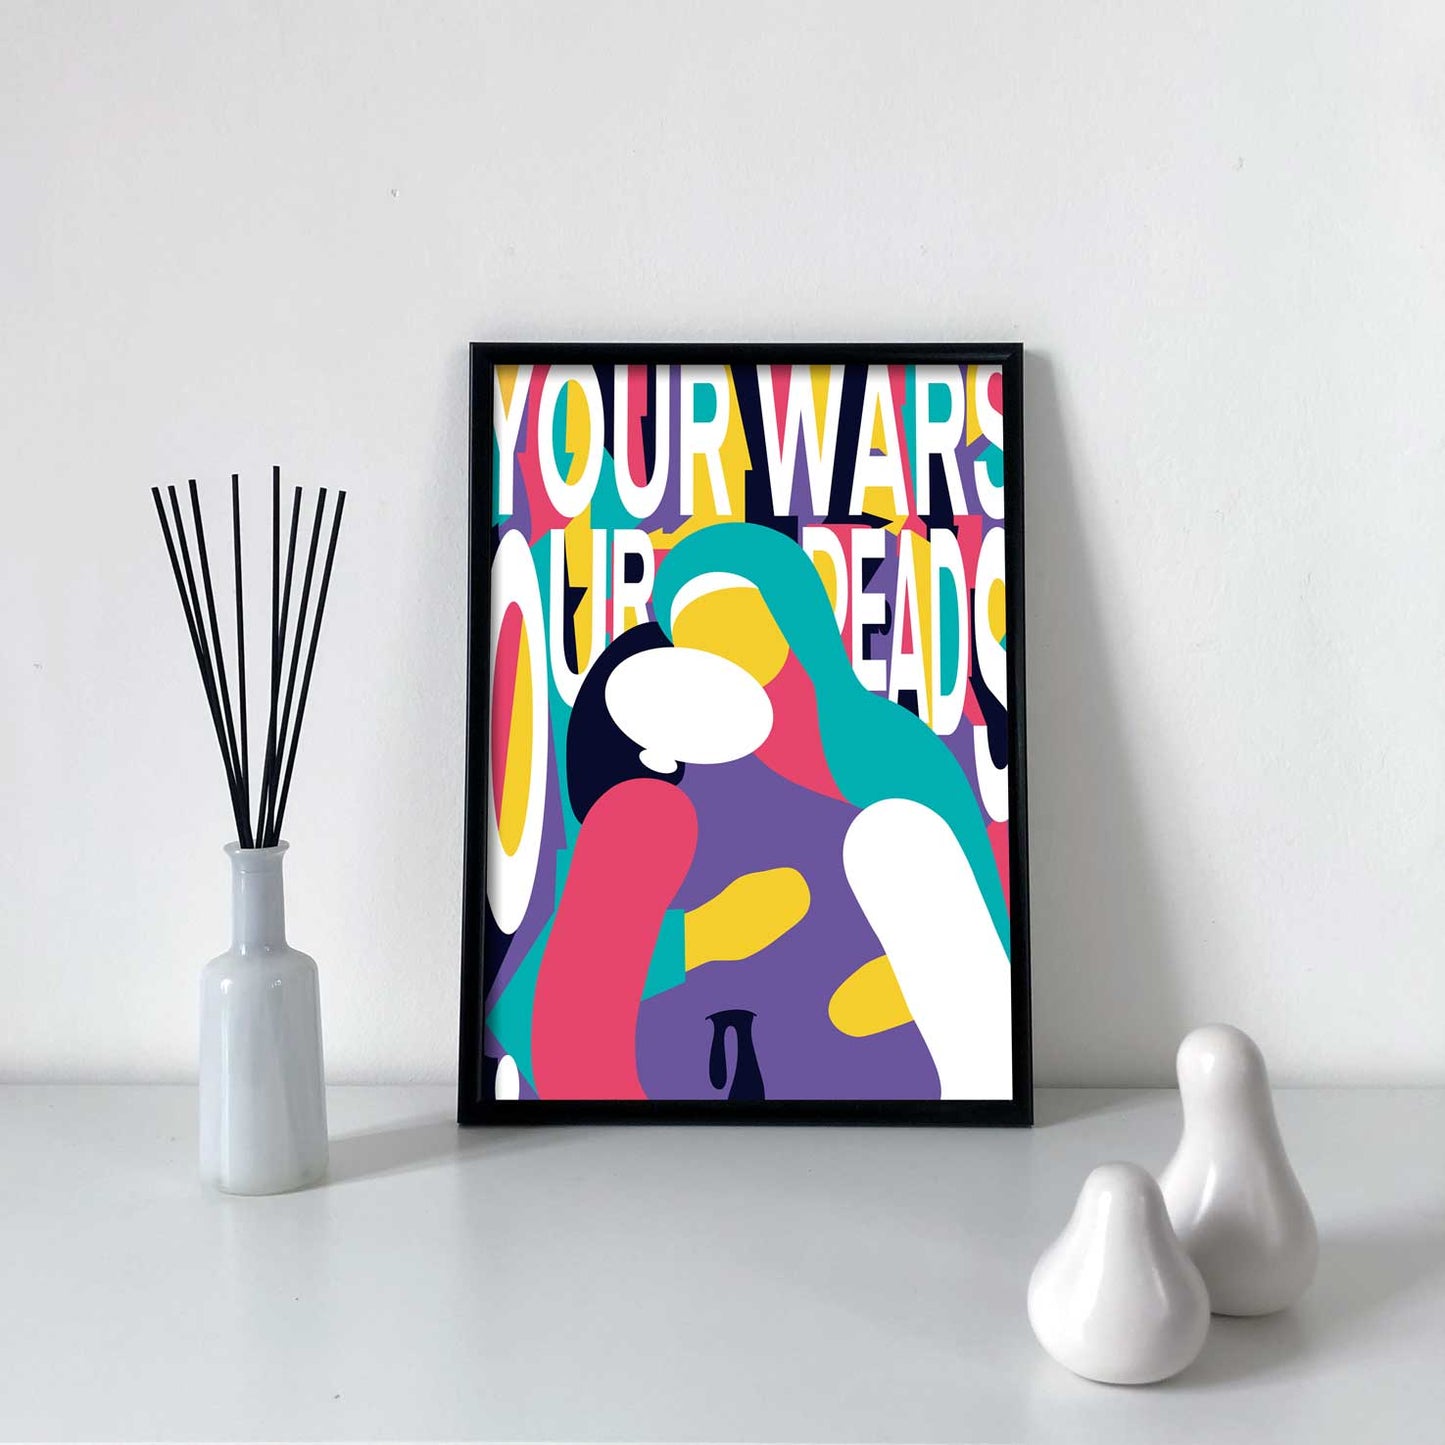 Stampa Digitale a Colori - Stile Poster & Urban Art: Your wars ours deads - 29,7x42